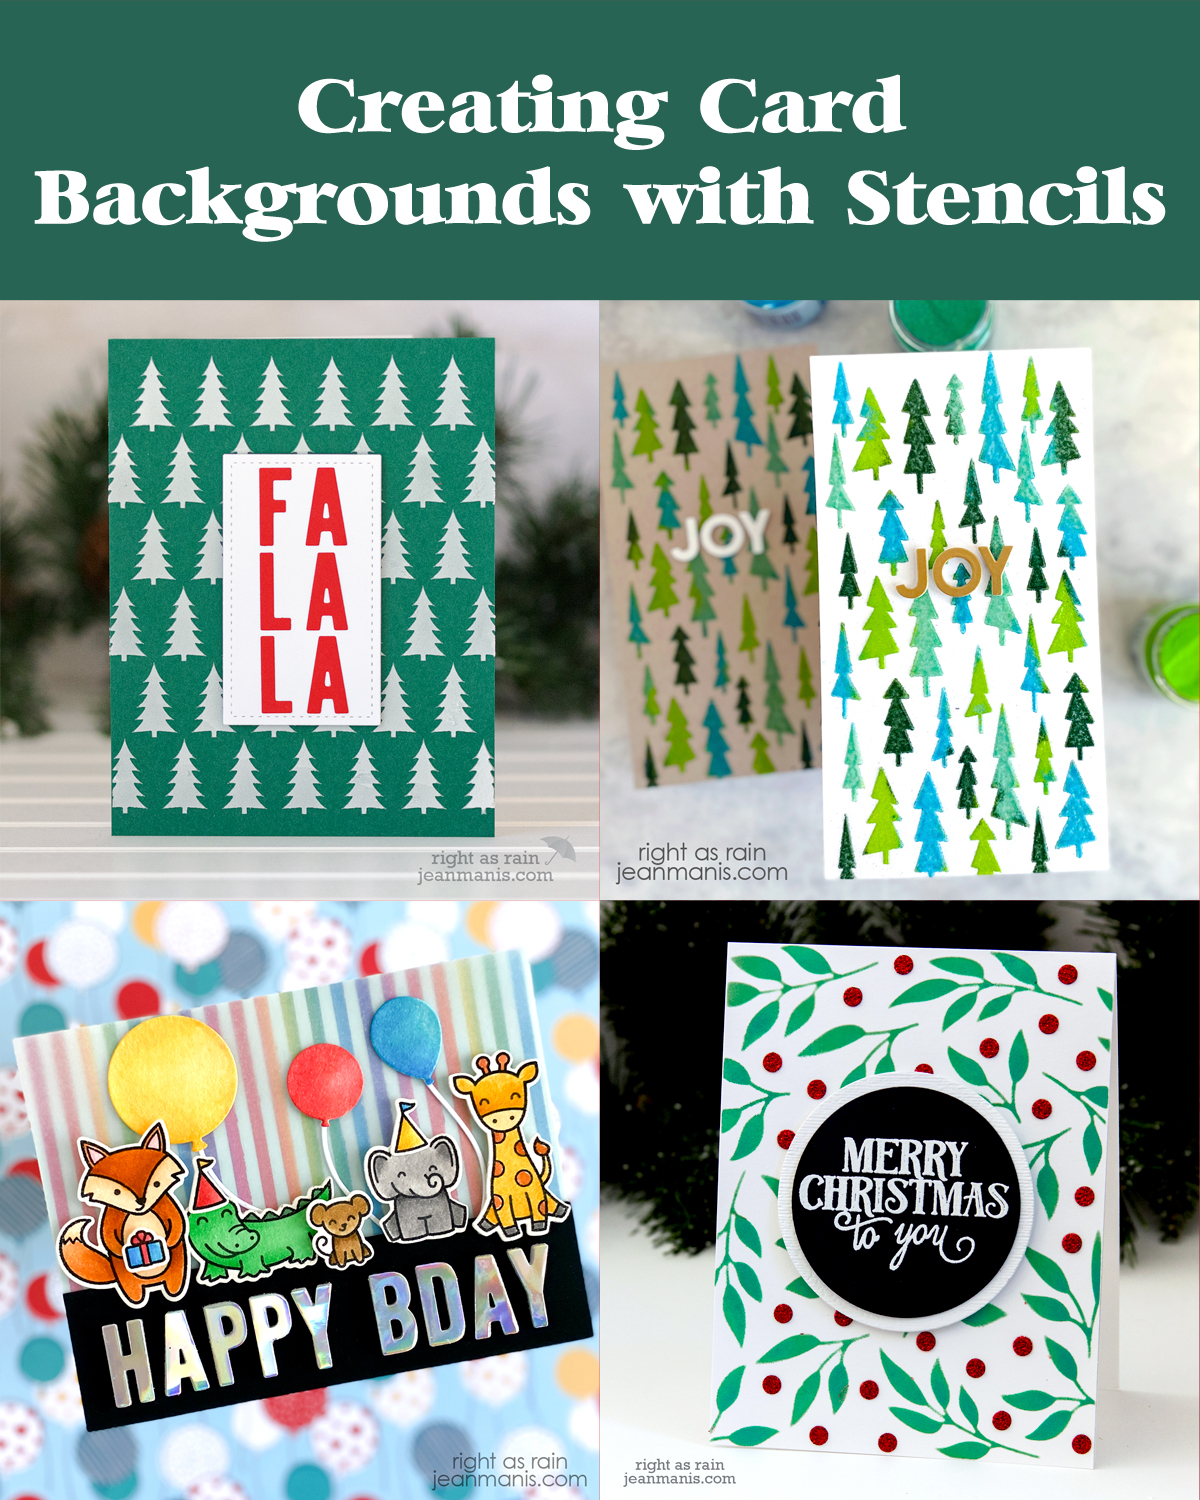 Creating Card Backgrounds with Stencils